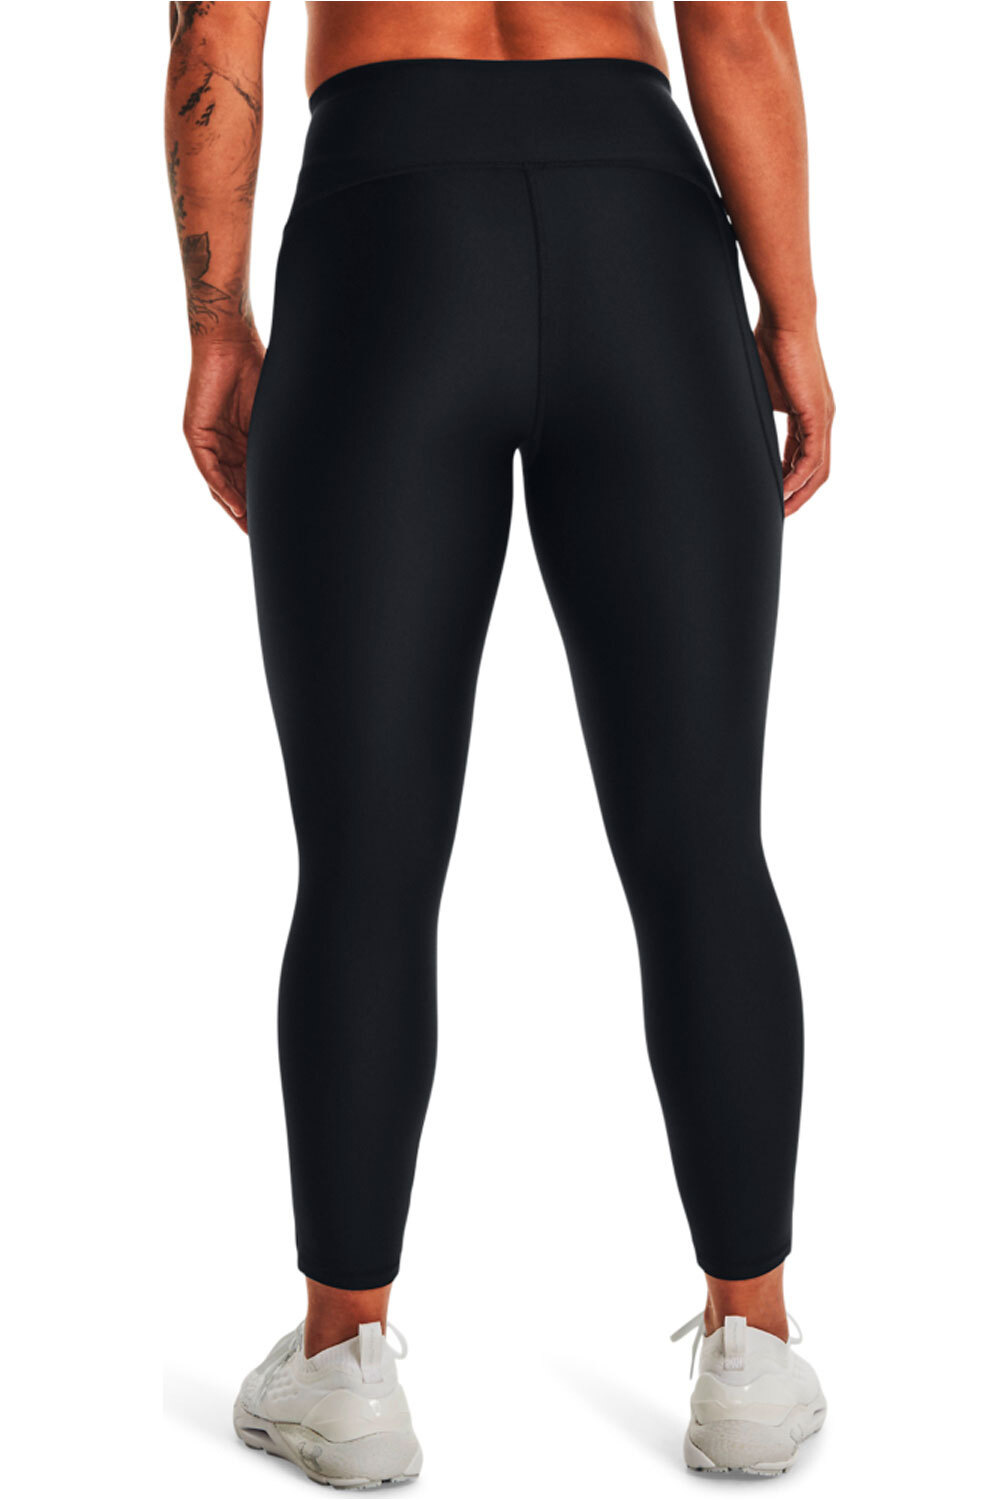 Under Armour pantalones y mallas largas fitness mujer HG Armour Taped Ankle Leg vista trasera